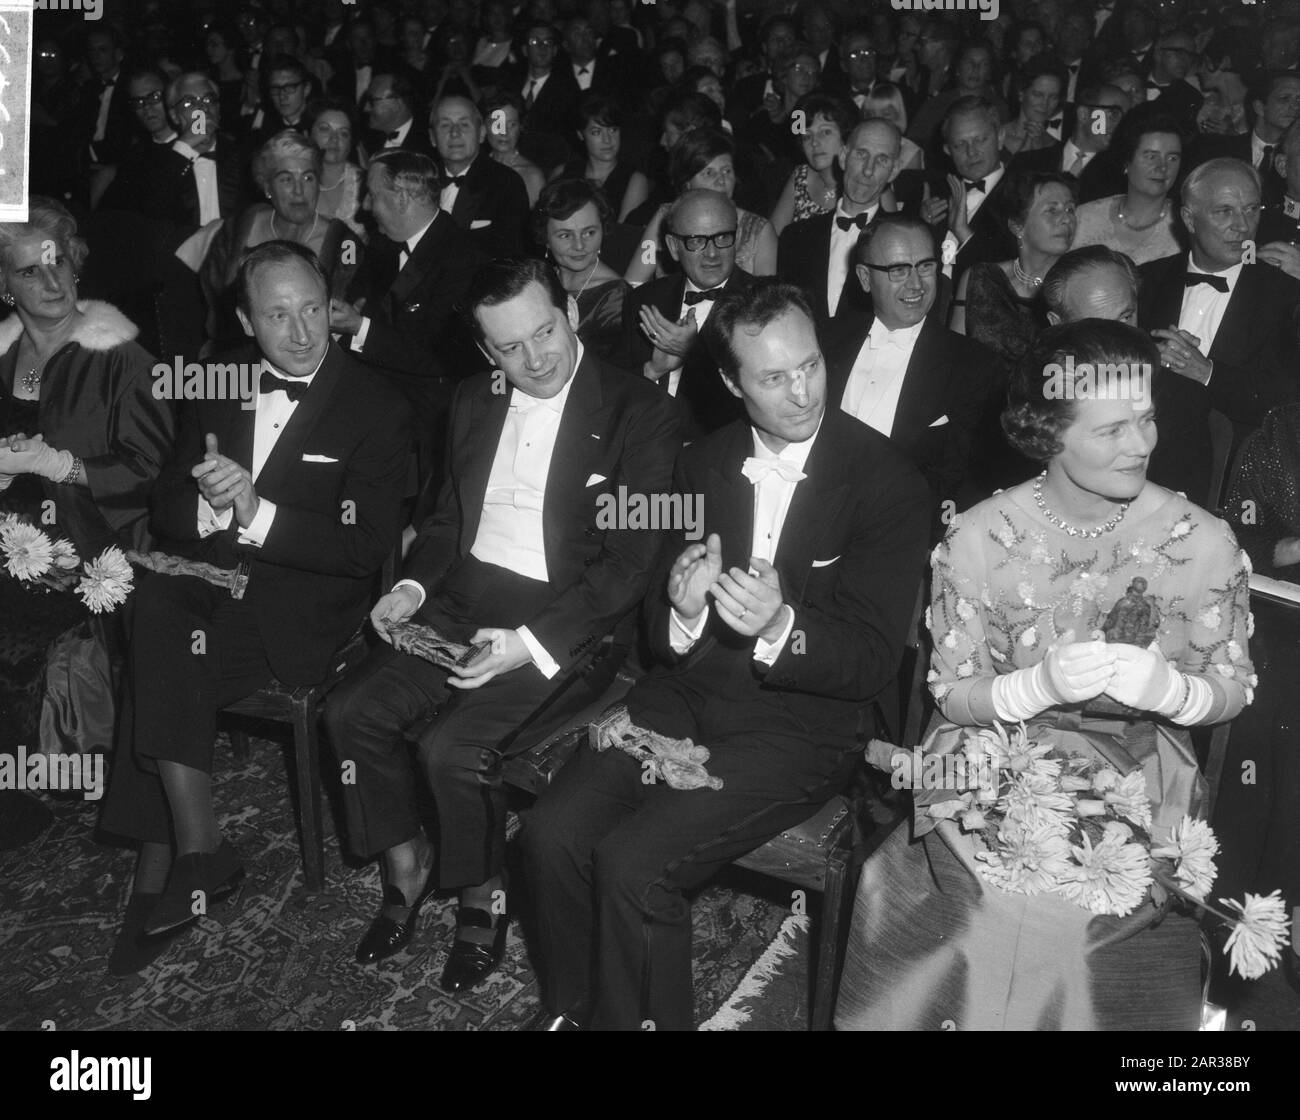 Grand Gala du Disque Classique 1965 in the Concertgebouw in Amsterdam  Four Edison winners; v.l.n.r. violinists Herman Krebbers and Arthur Grumiaux, conductor Carlo Maria Giulini and Mrs. Soames (daughter of Winston Churchill) Date: 29 October 1965 Location: Amsterdam, Noord-Holland Keywords: cultural awards, classical music, musicians, awards Personal name: Giulini, Carlo Maria, Grumiaux, Arthur, Krebbers, Herman, Soames, Mary Stock Photo